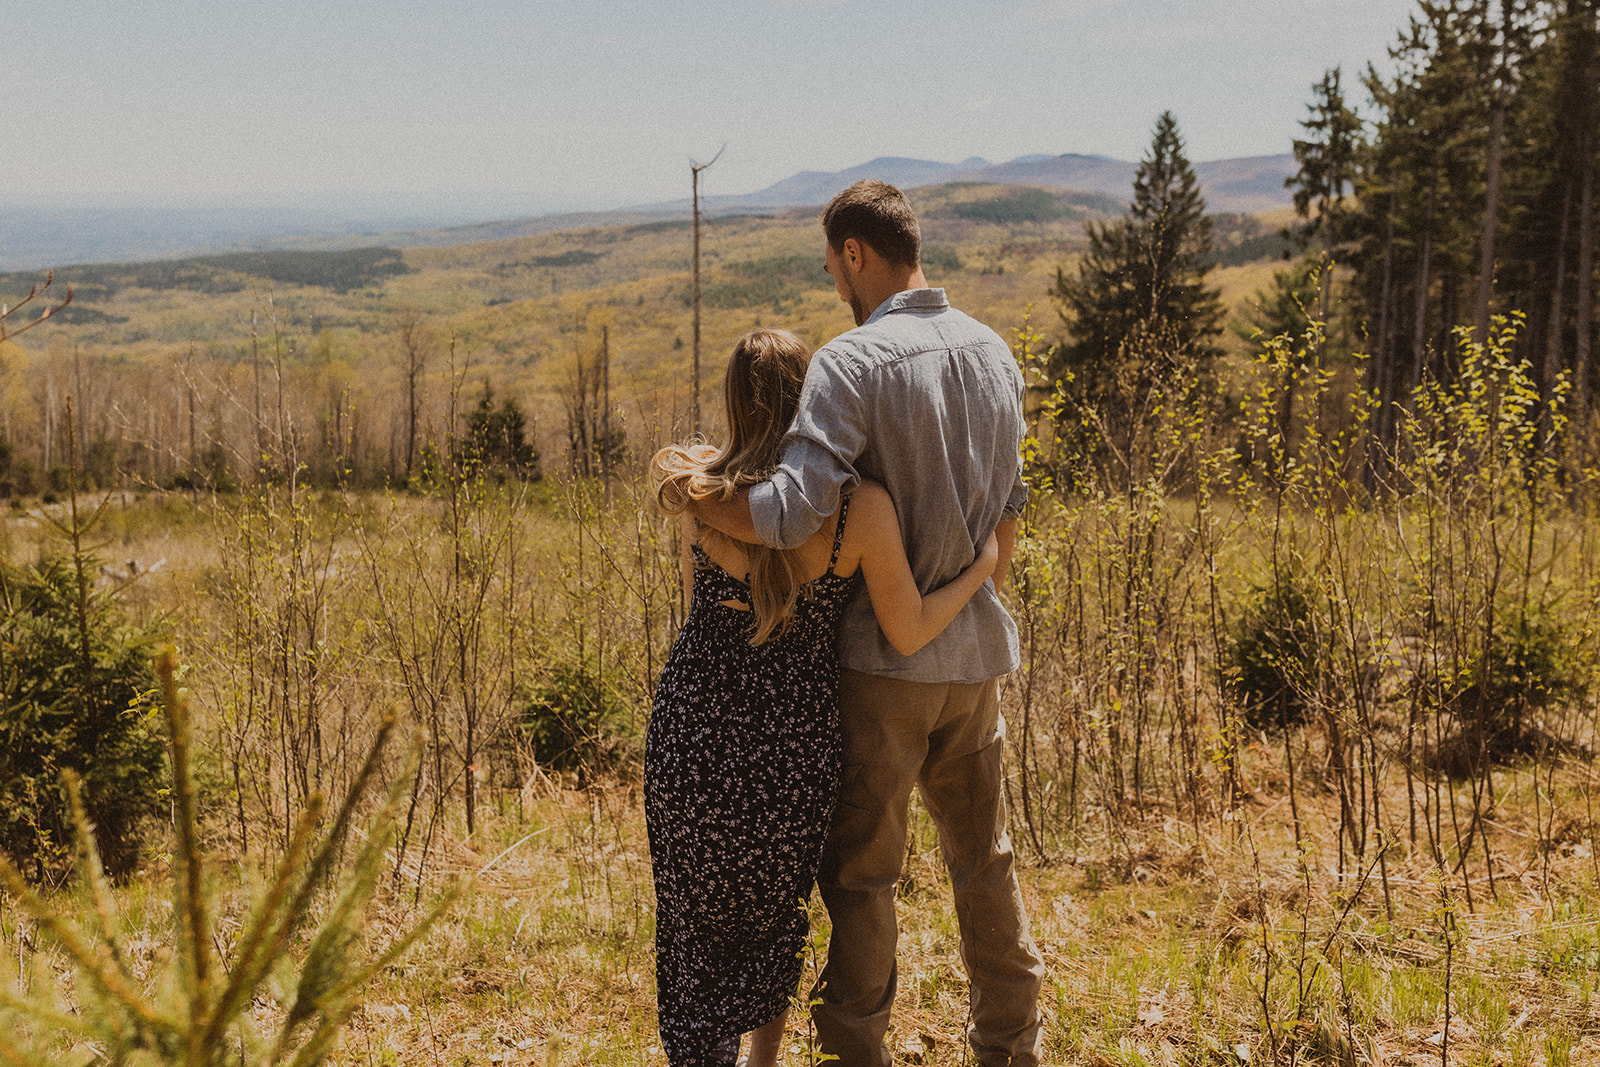 Future parents pose romanticly together during their western maternity photos